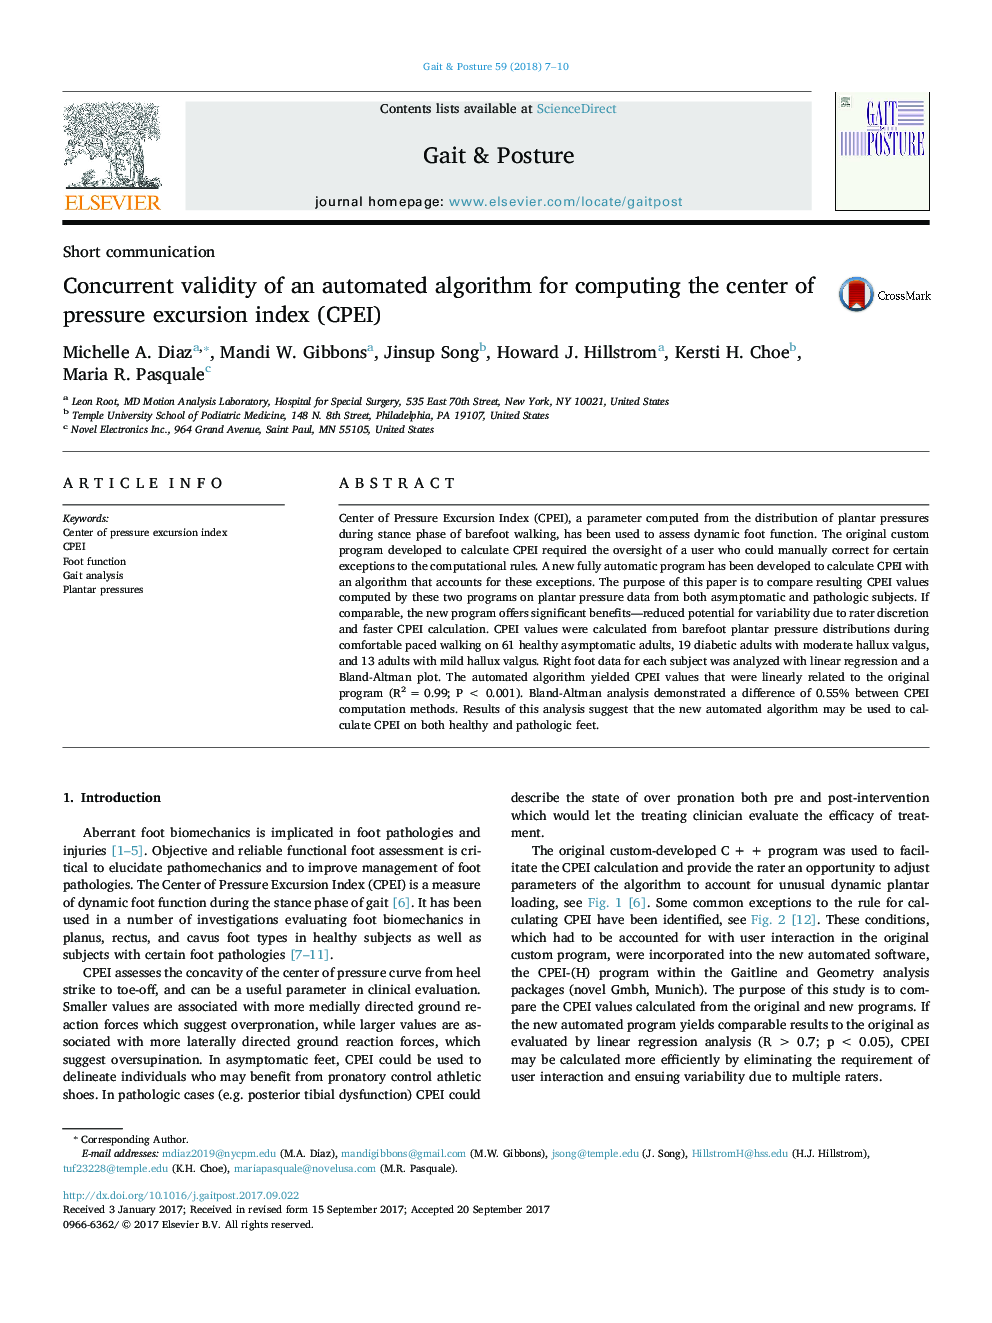 Concurrent validity of an automated algorithm for computing the center of pressure excursion index (CPEI)